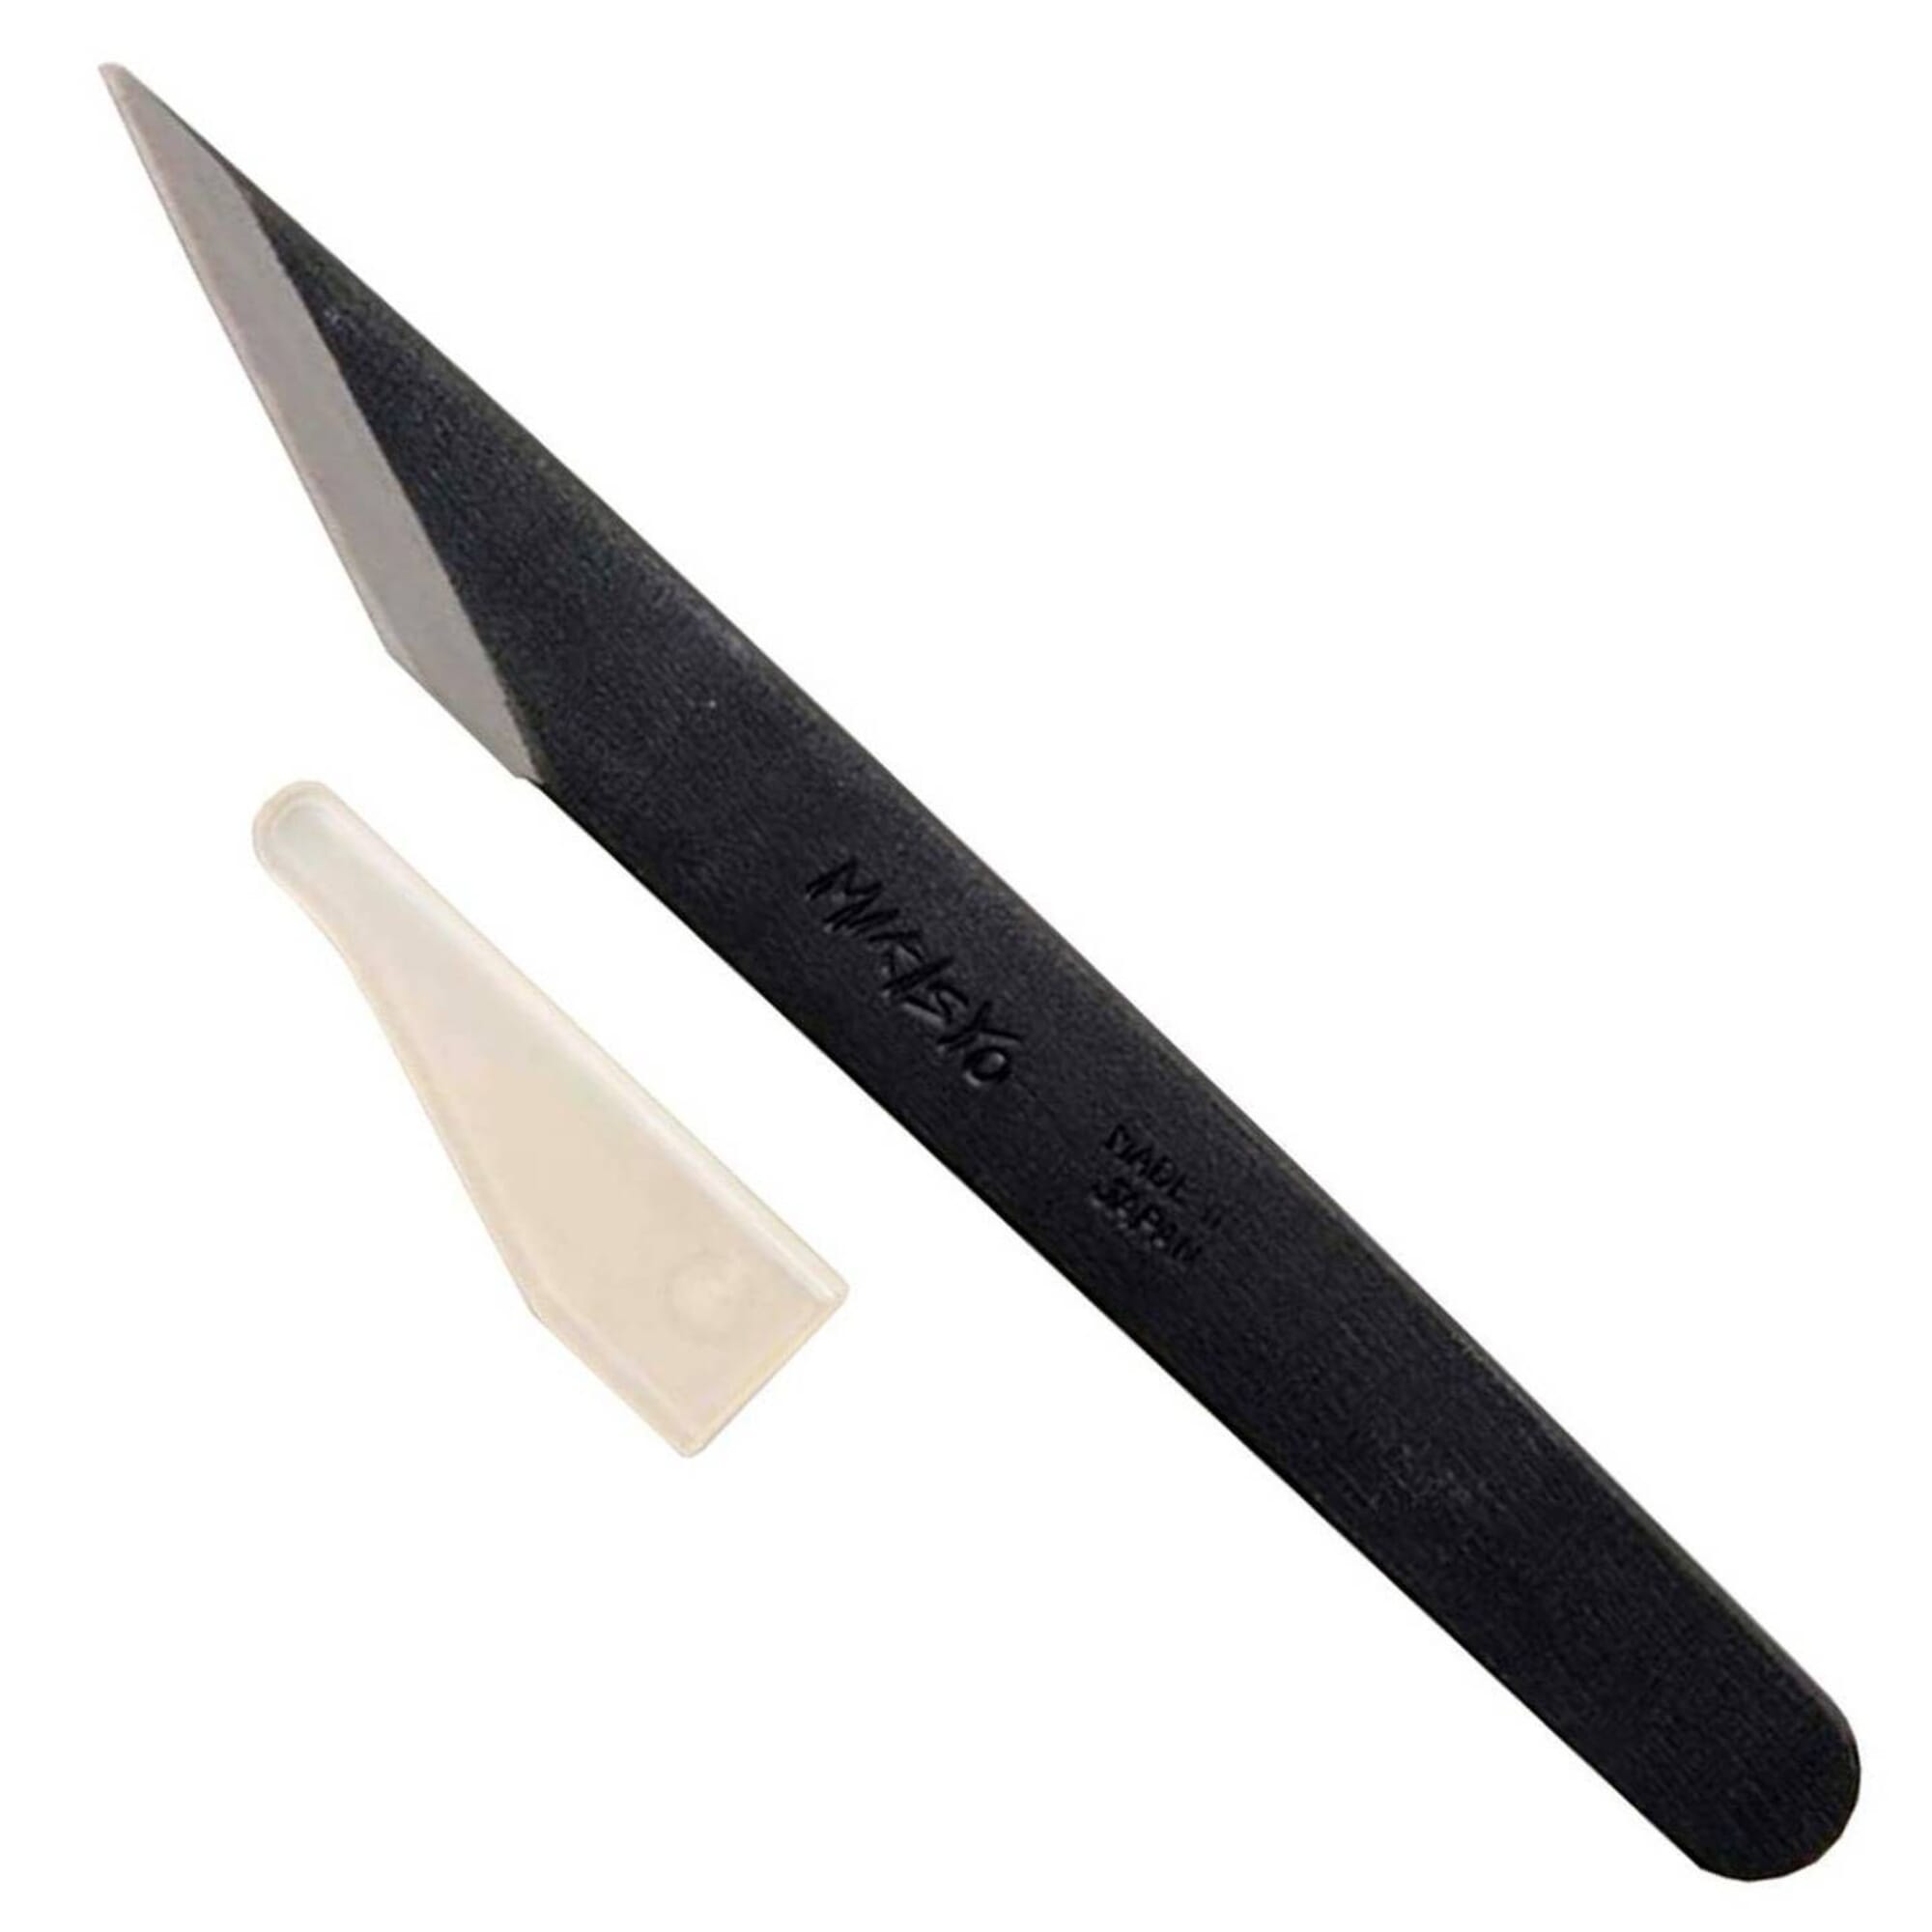 Michihamono Specialized Japanese Wood Carving Tool 35mm Double Bevel Whittling Knife, with High-Speed Steel Blade, for Woodworking